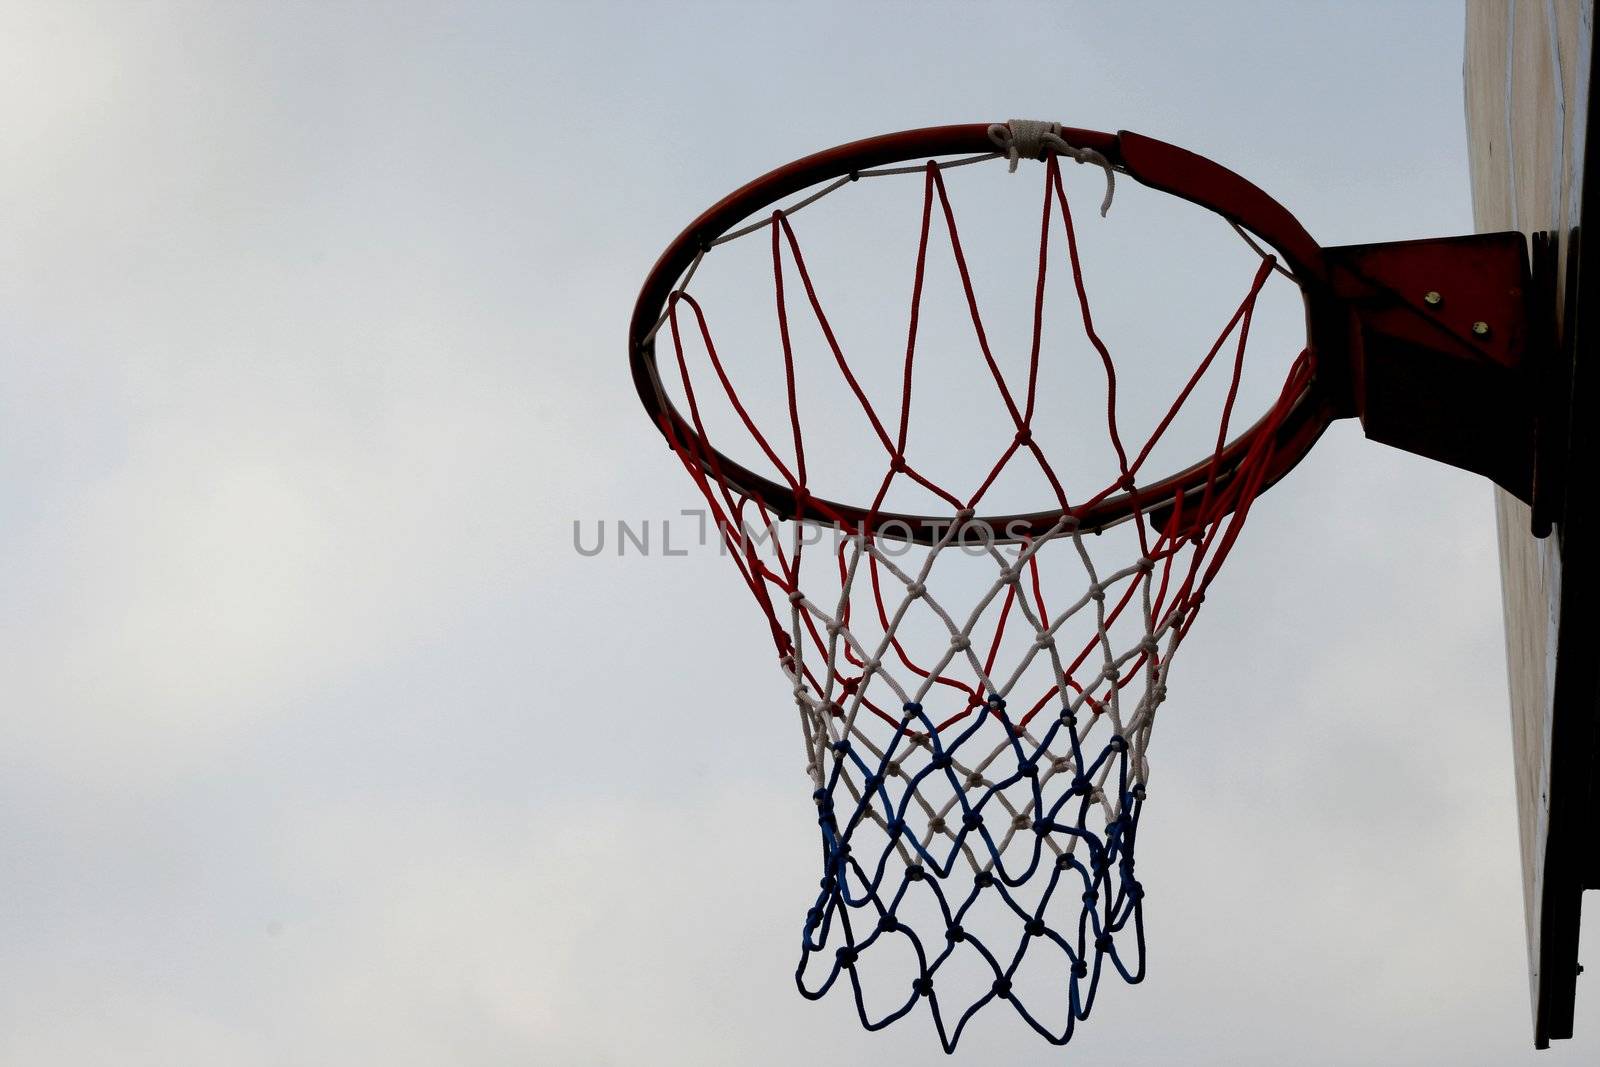 Basketball ring hoop and net with sky as background-with copy space